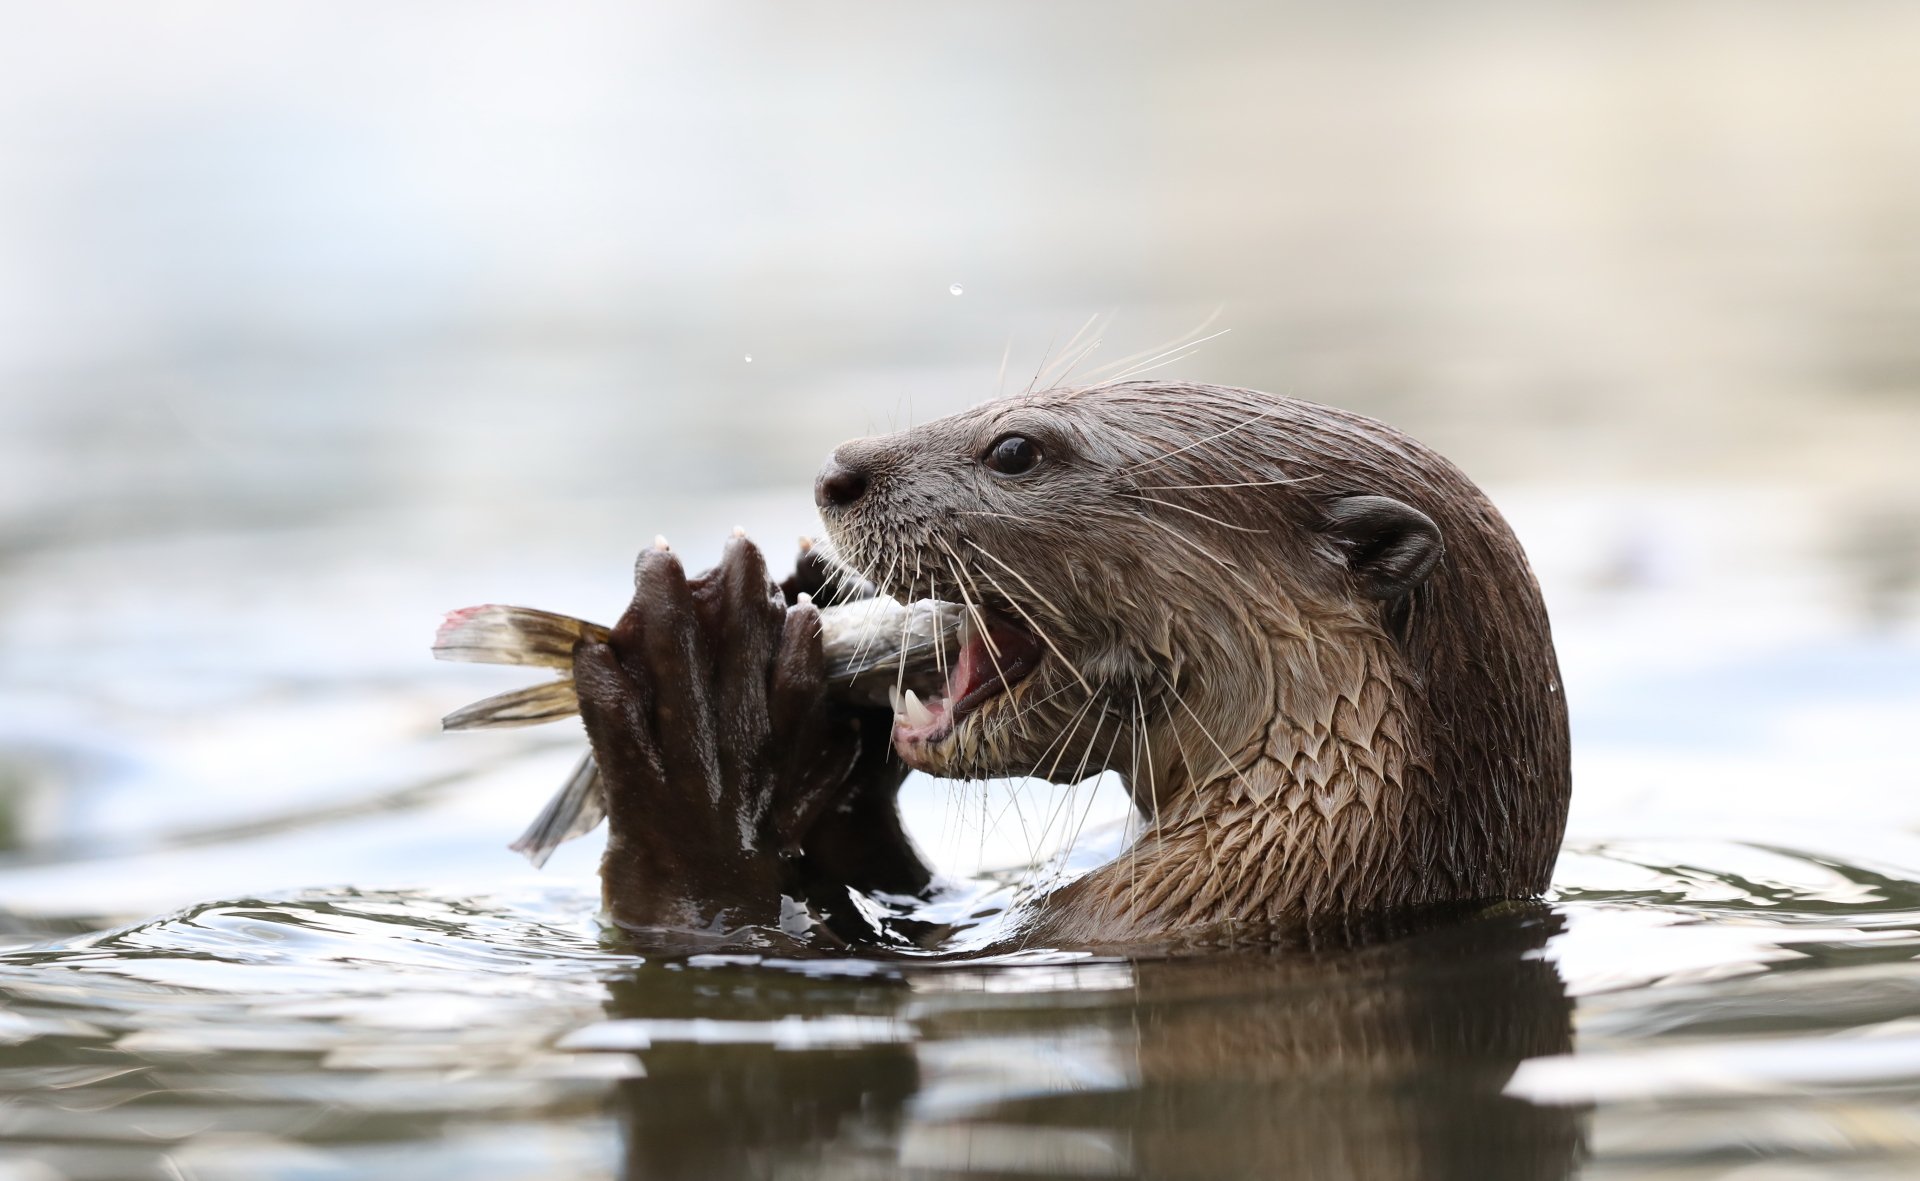 Hairy otter sprays fountain best adult free image